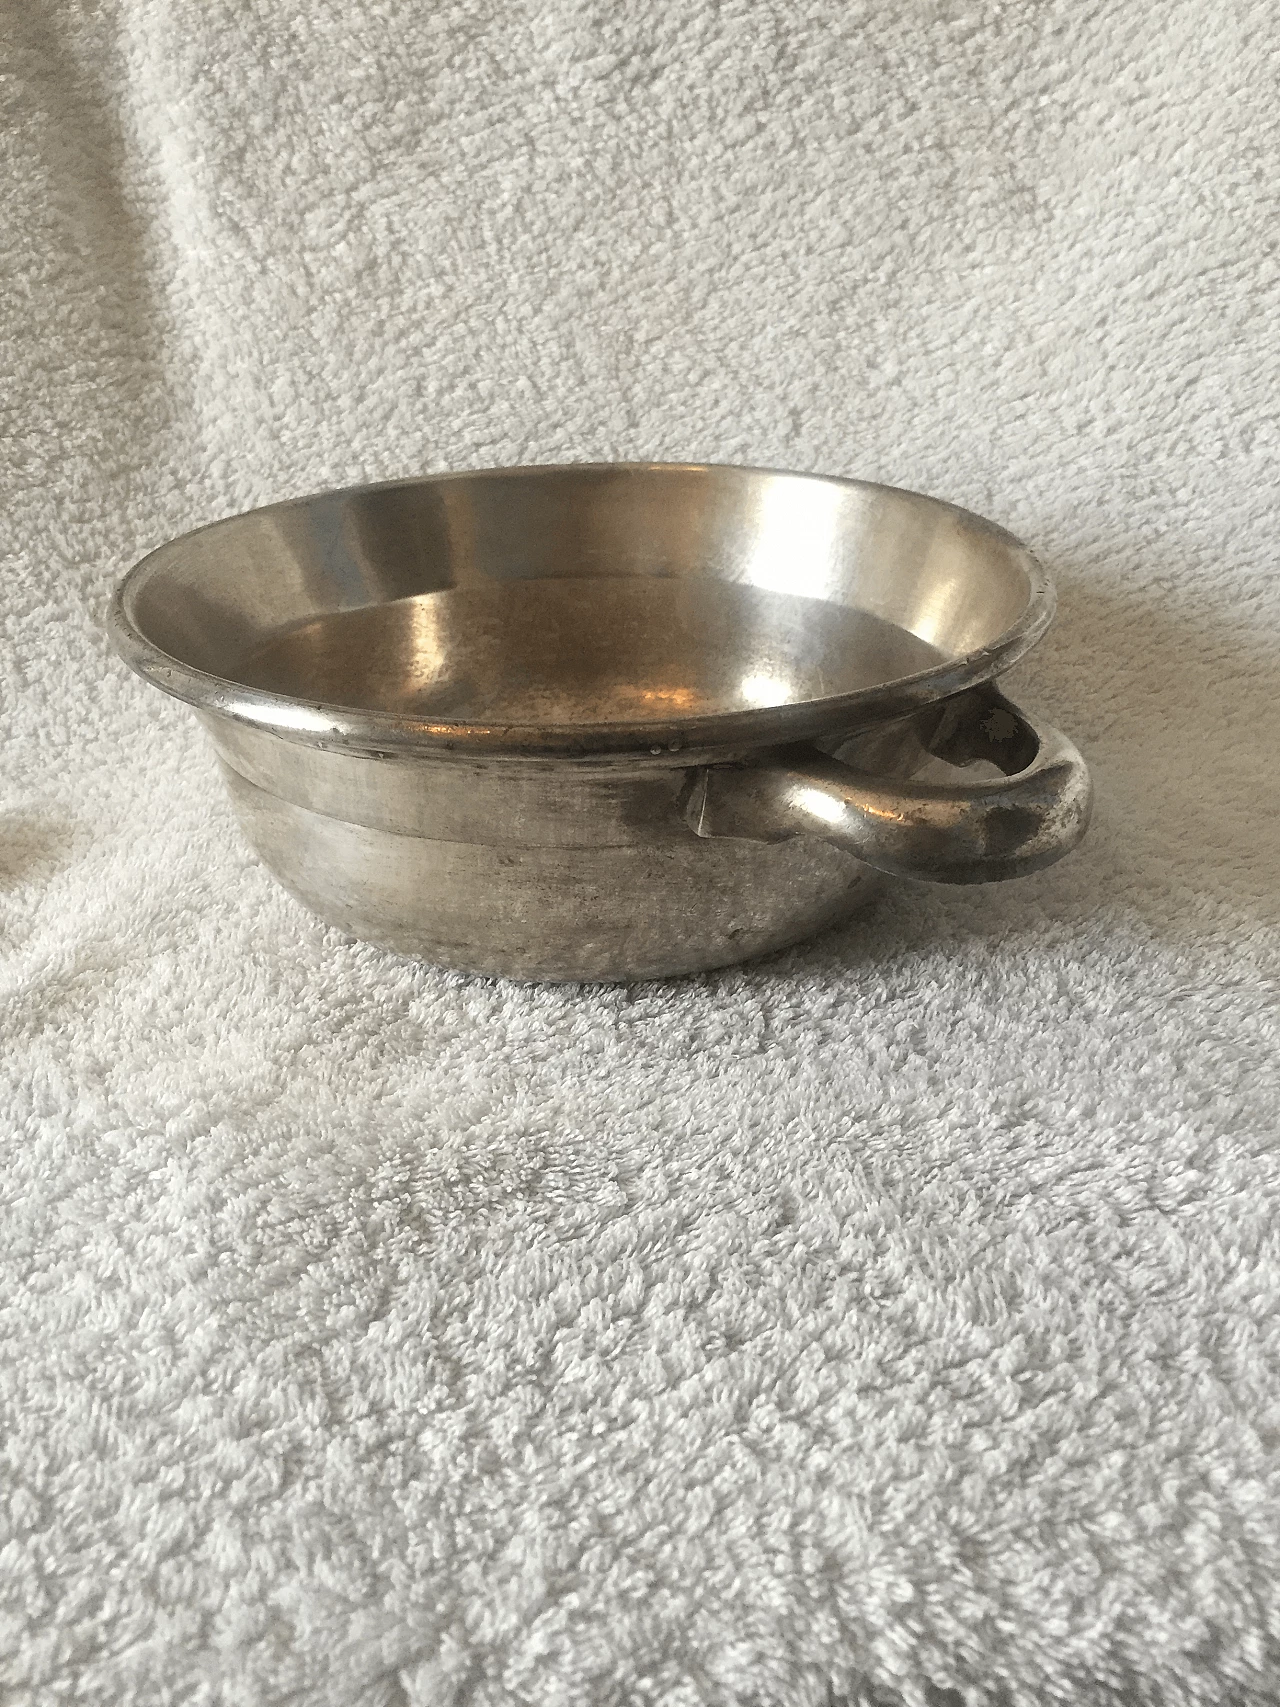 Silver-plated serving bowl by Gio' Ponti for the Calderoni brothers, 1950s 1367343